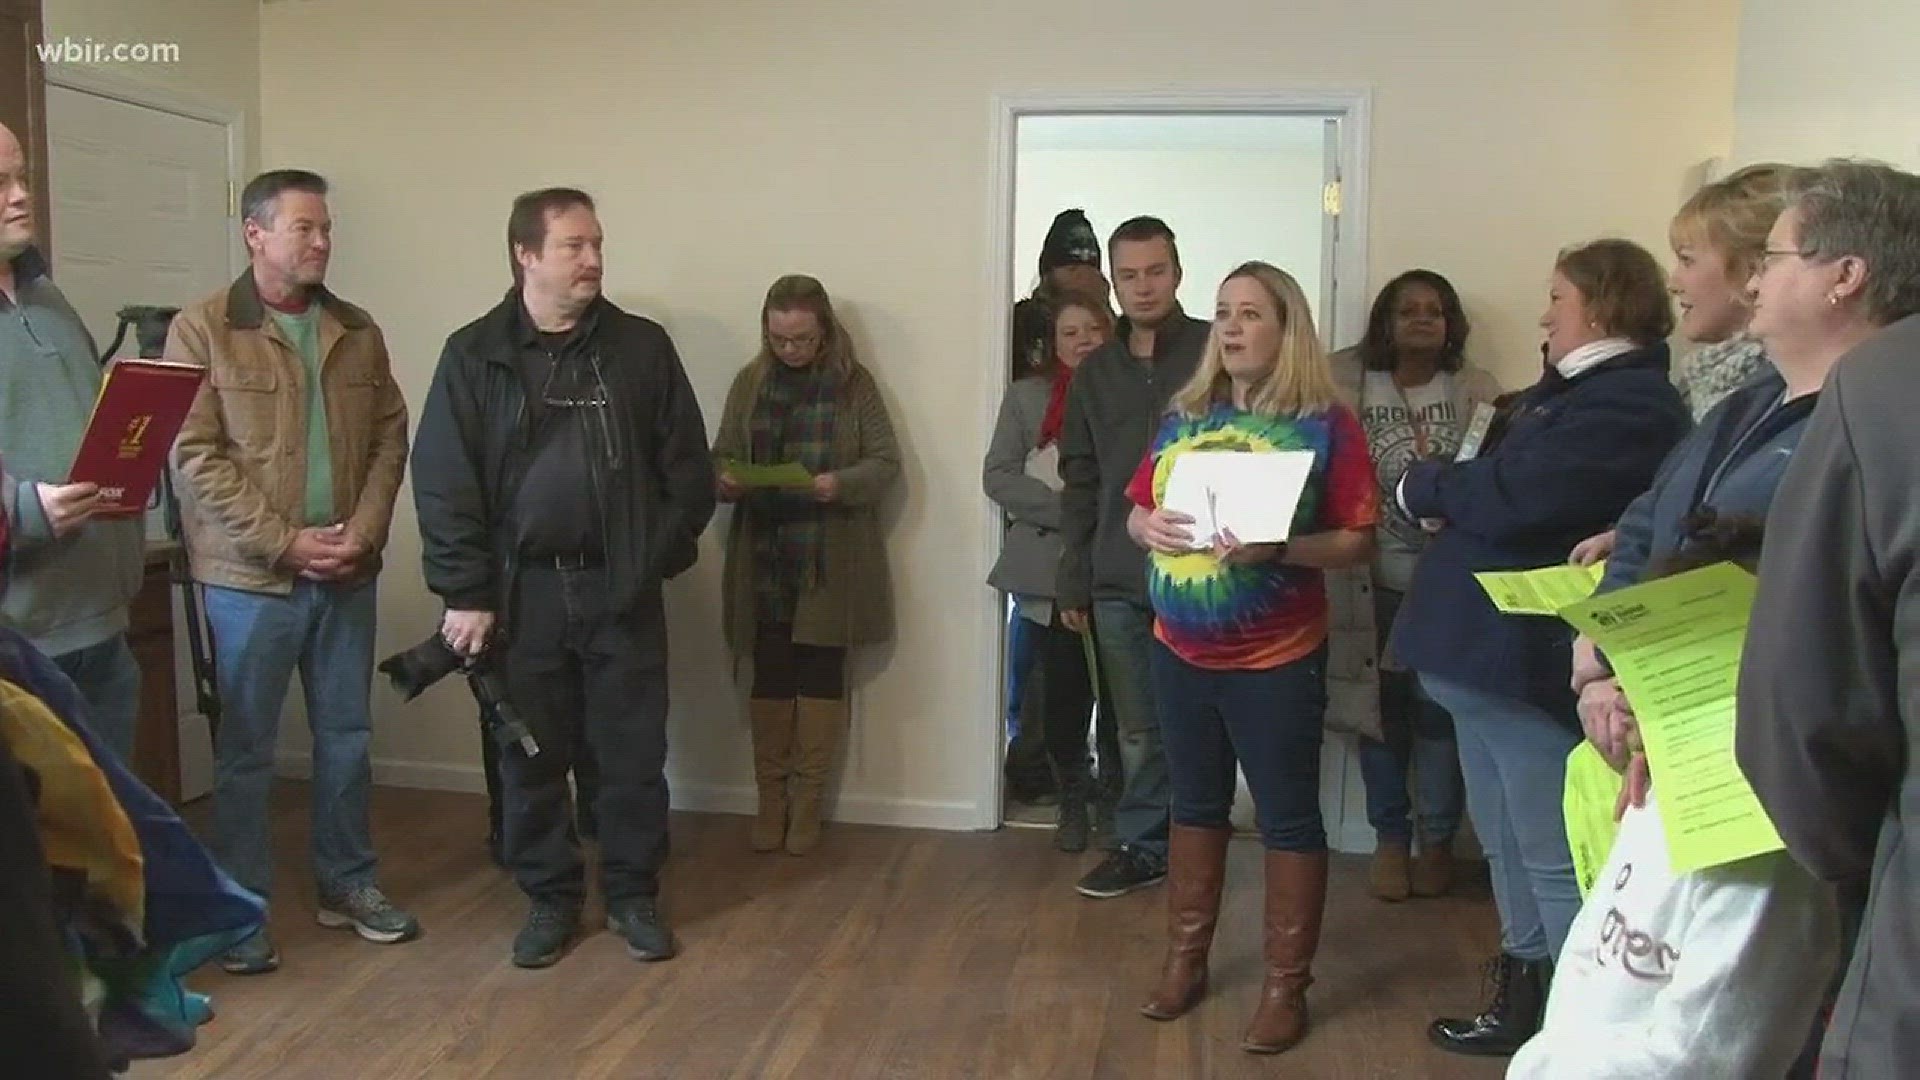 One Knoxville family is moving into their new home thanks to help from the East Tennessee community.